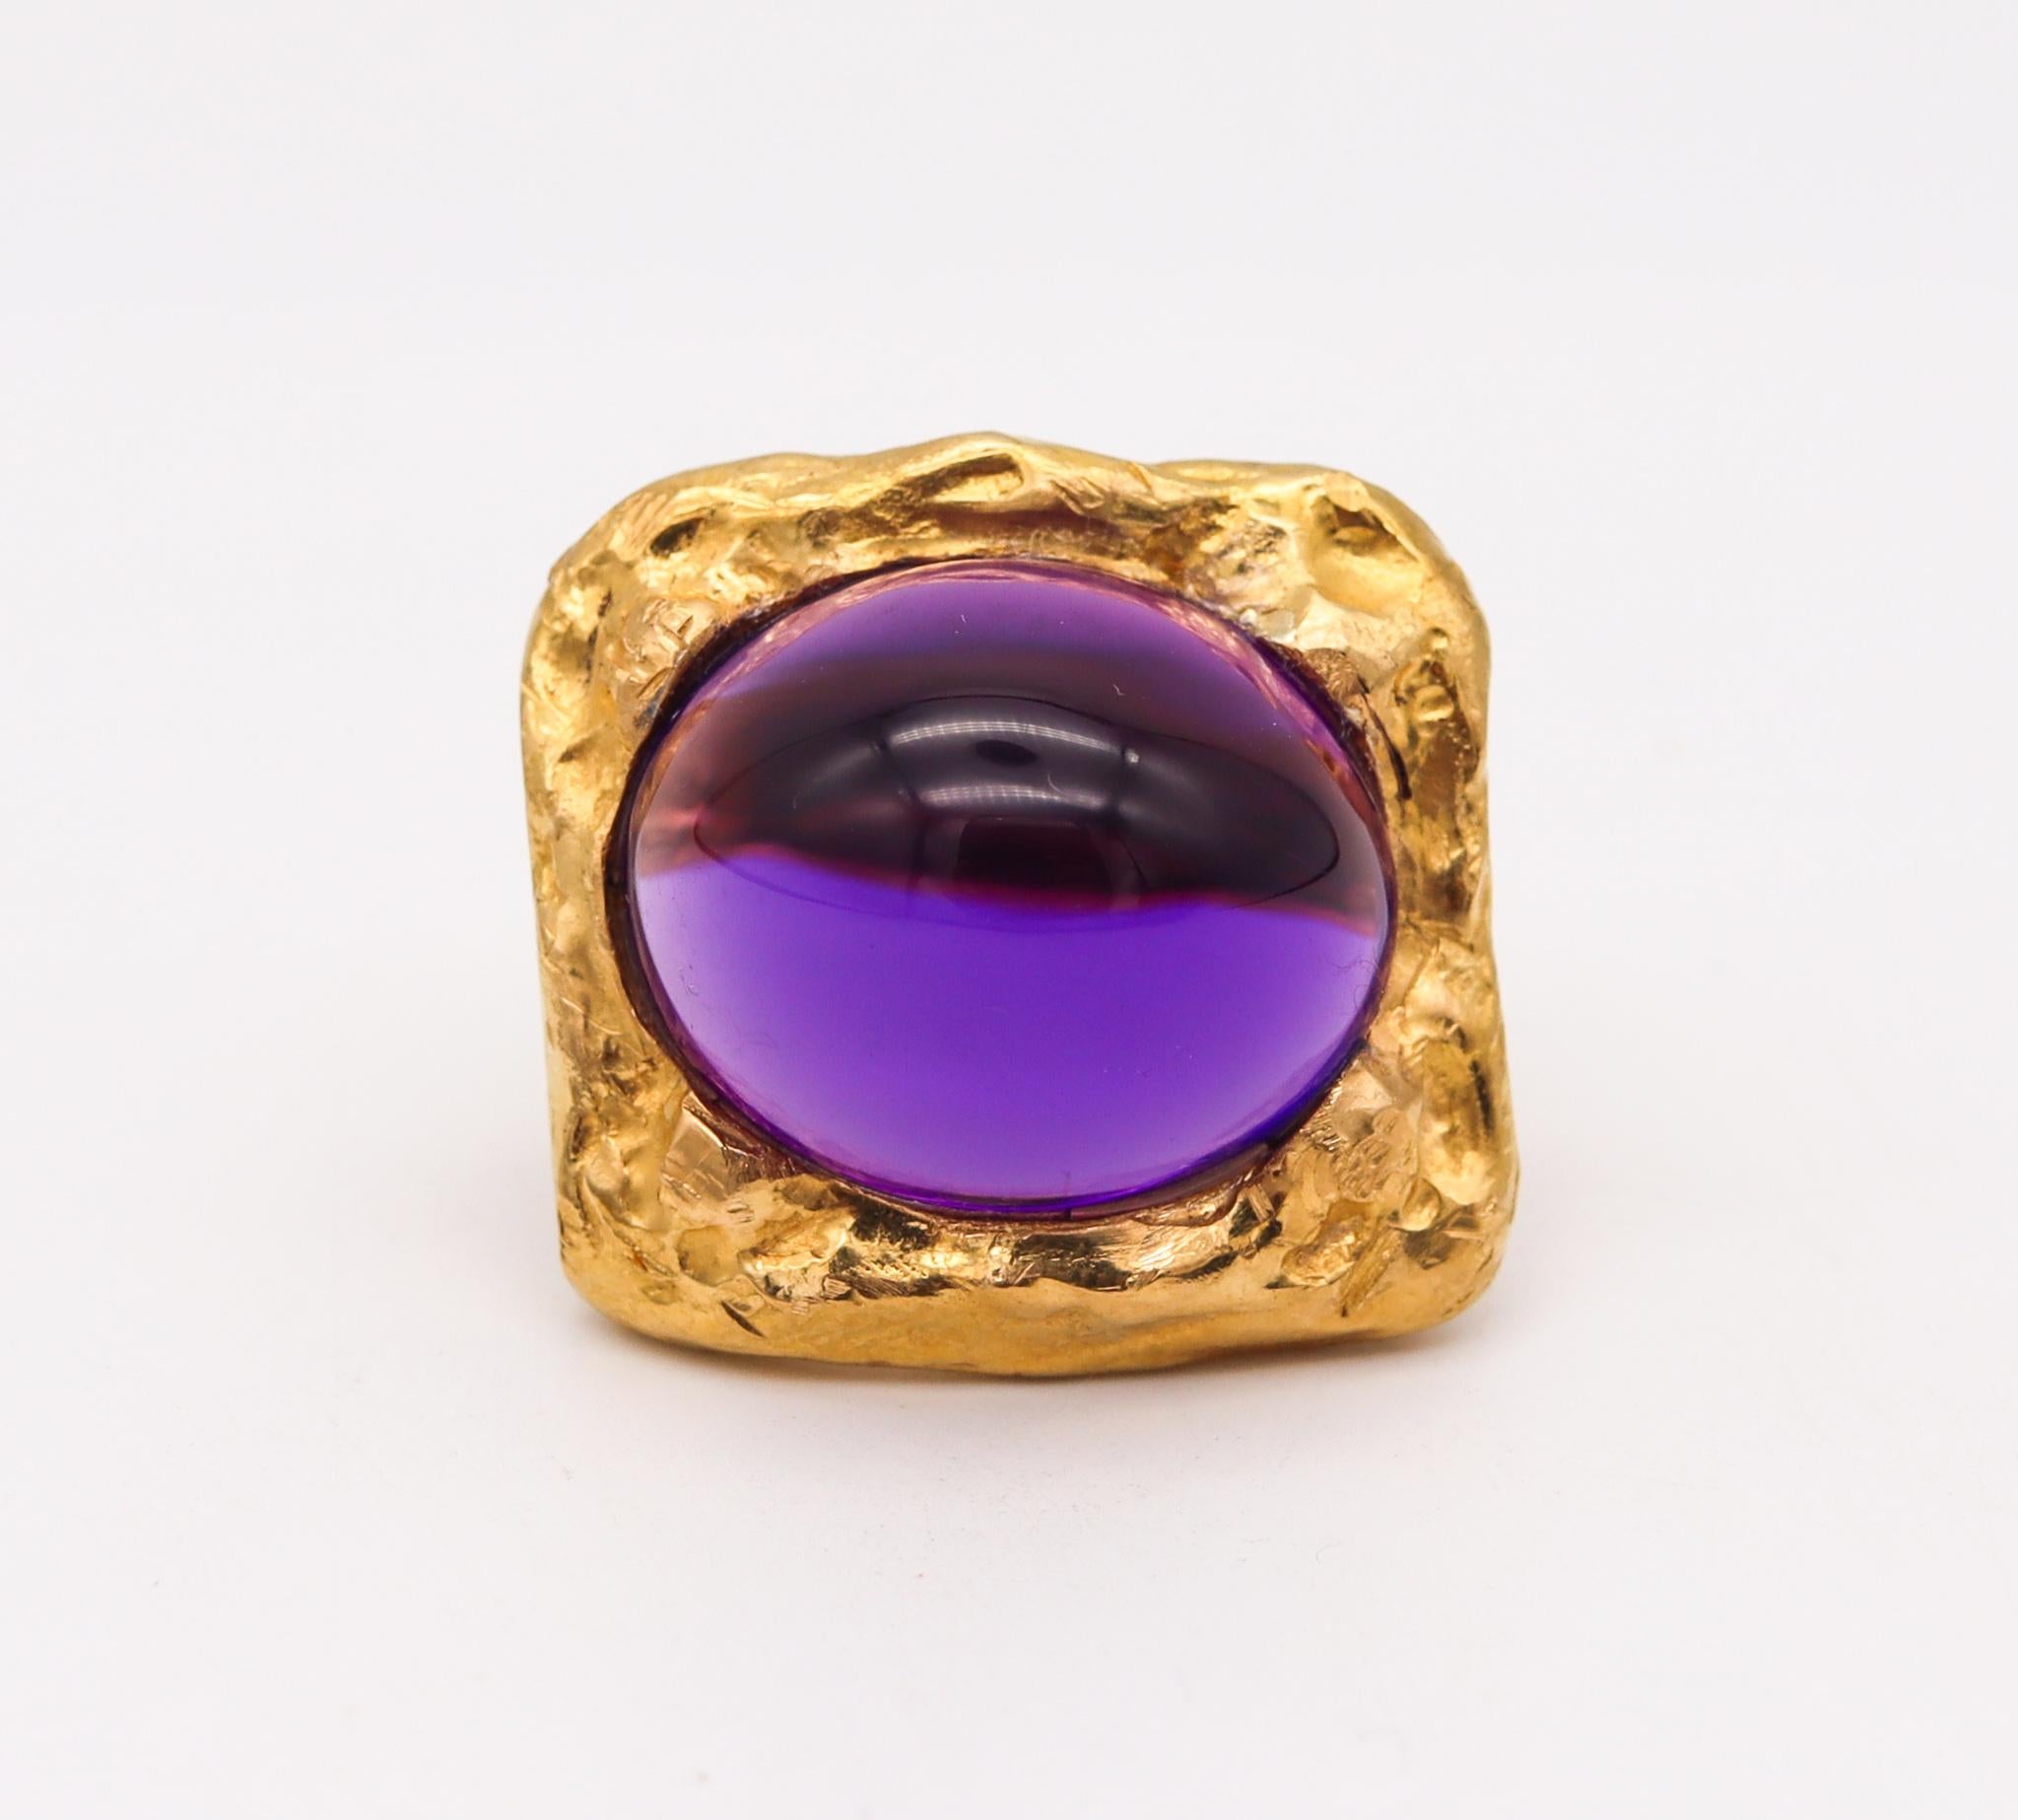 Sculptural cocktail ring designed by Jean Mahie.

A very rare piece of wearable art, created in Paris France by the artist, sculptor and goldsmith Jean Mahie, back in the late 1970's. Mahie's rings with color gemstones like this, are very rare and